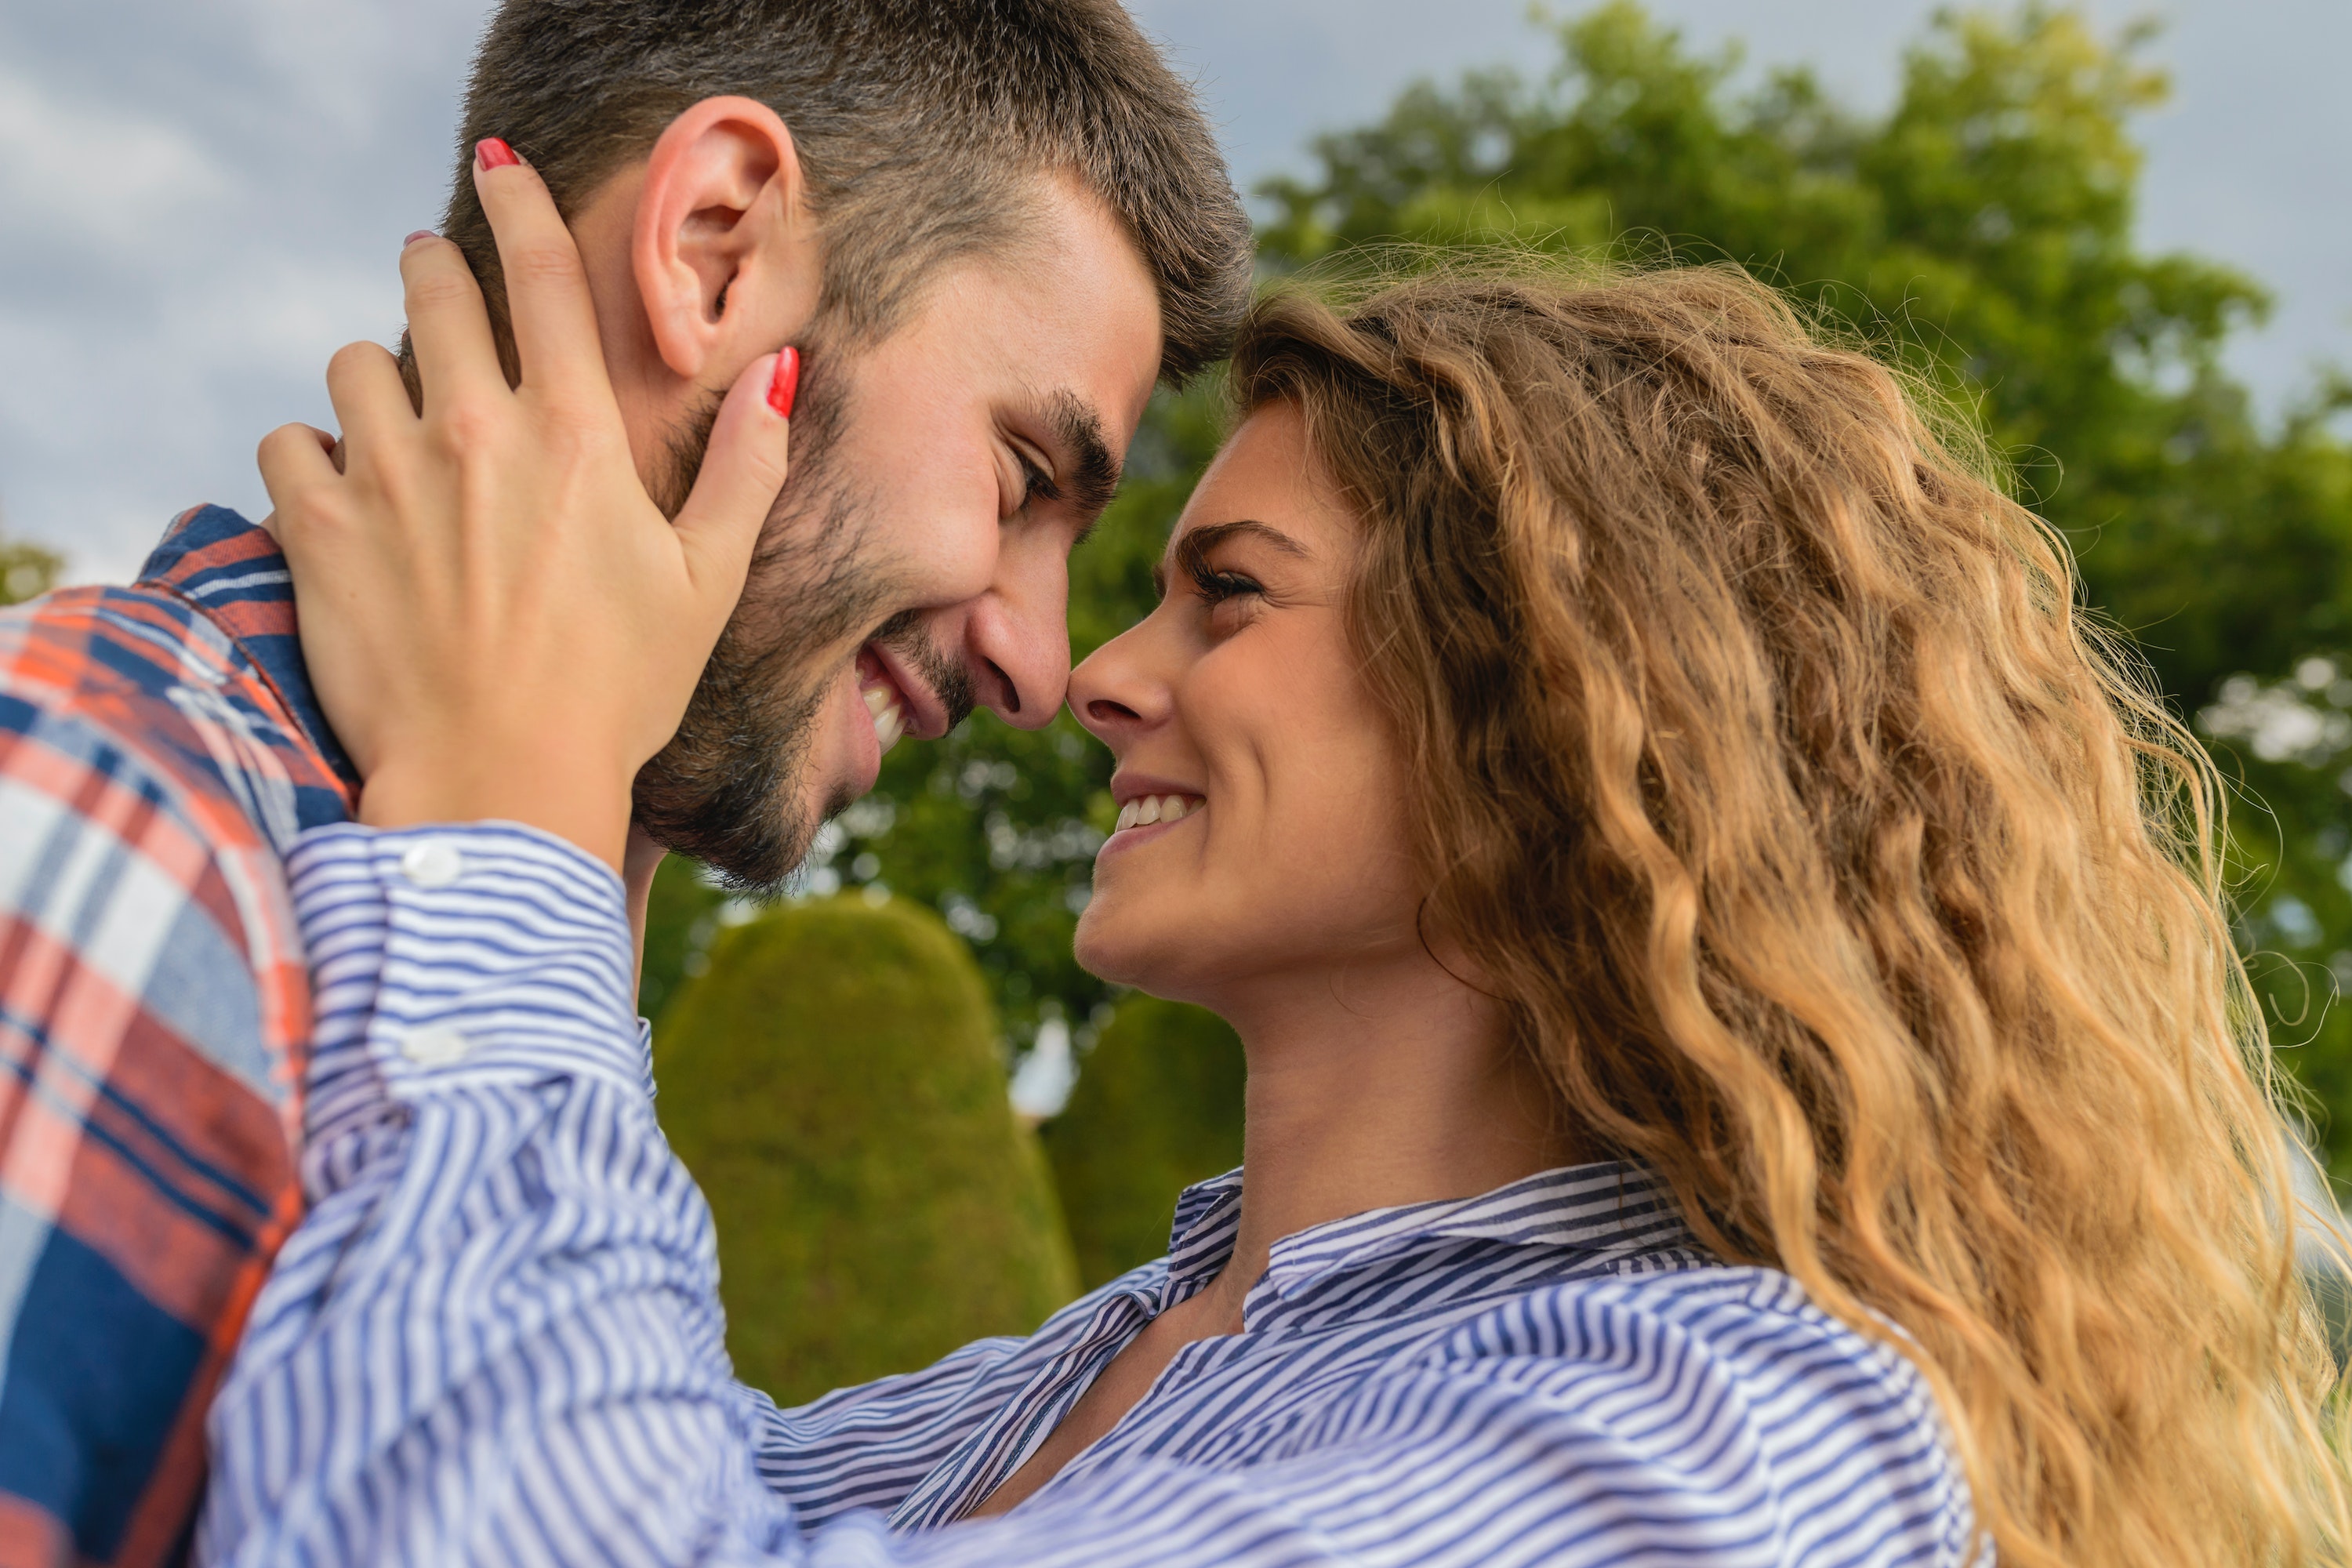 Couple touching their noses. | Source: Pexels